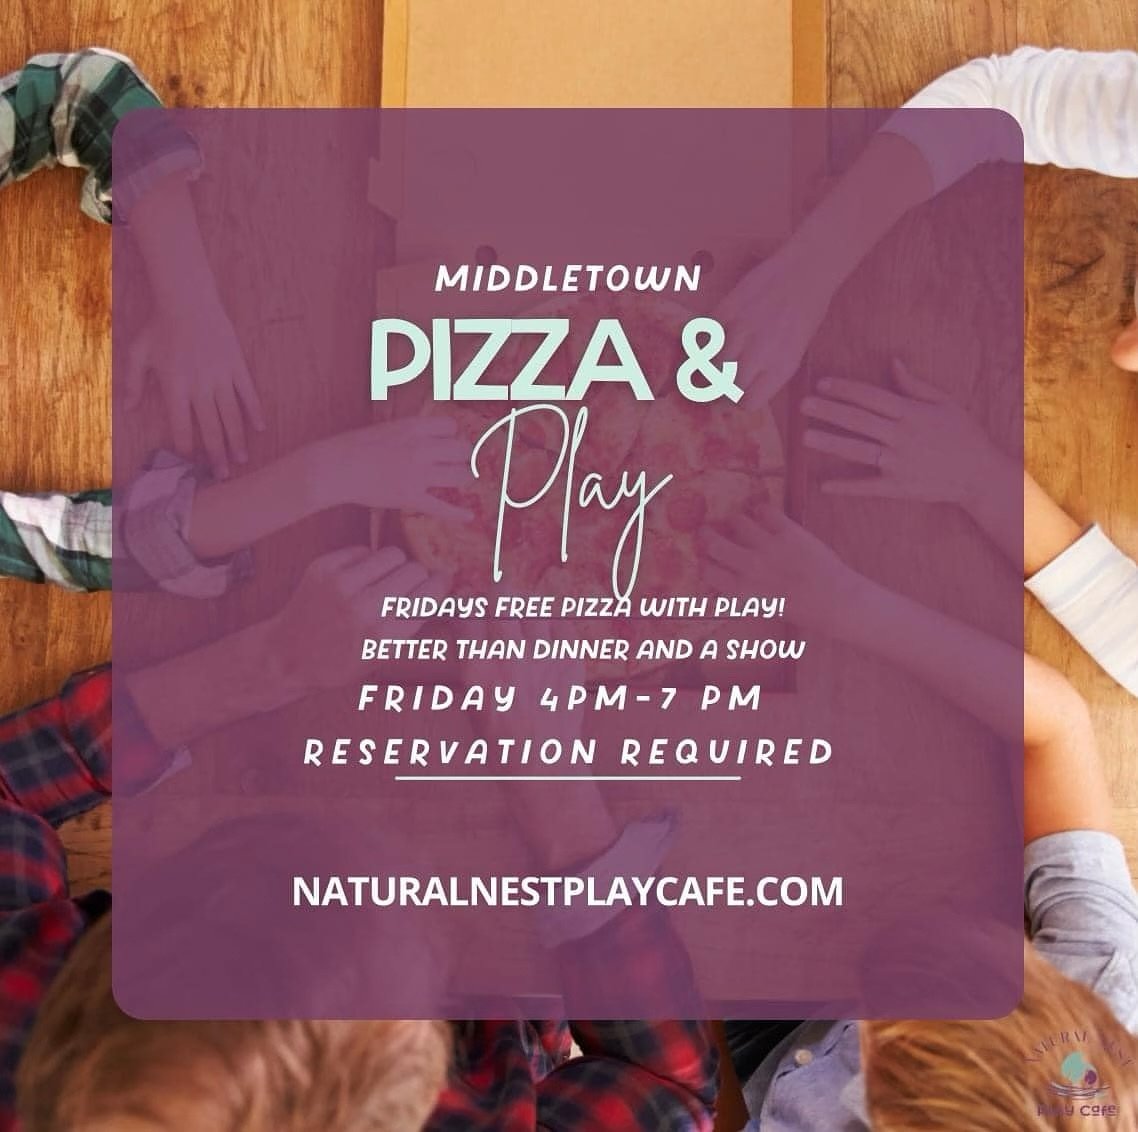 It&rsquo;s the first Friday of the month! That means pizza and play tonight, we&rsquo;re open until 7!
First Friday loading!!!!! Join us for Pizza and Play on the first Friday of March! Play Reservations are required for fun! Leave dinner to us and l